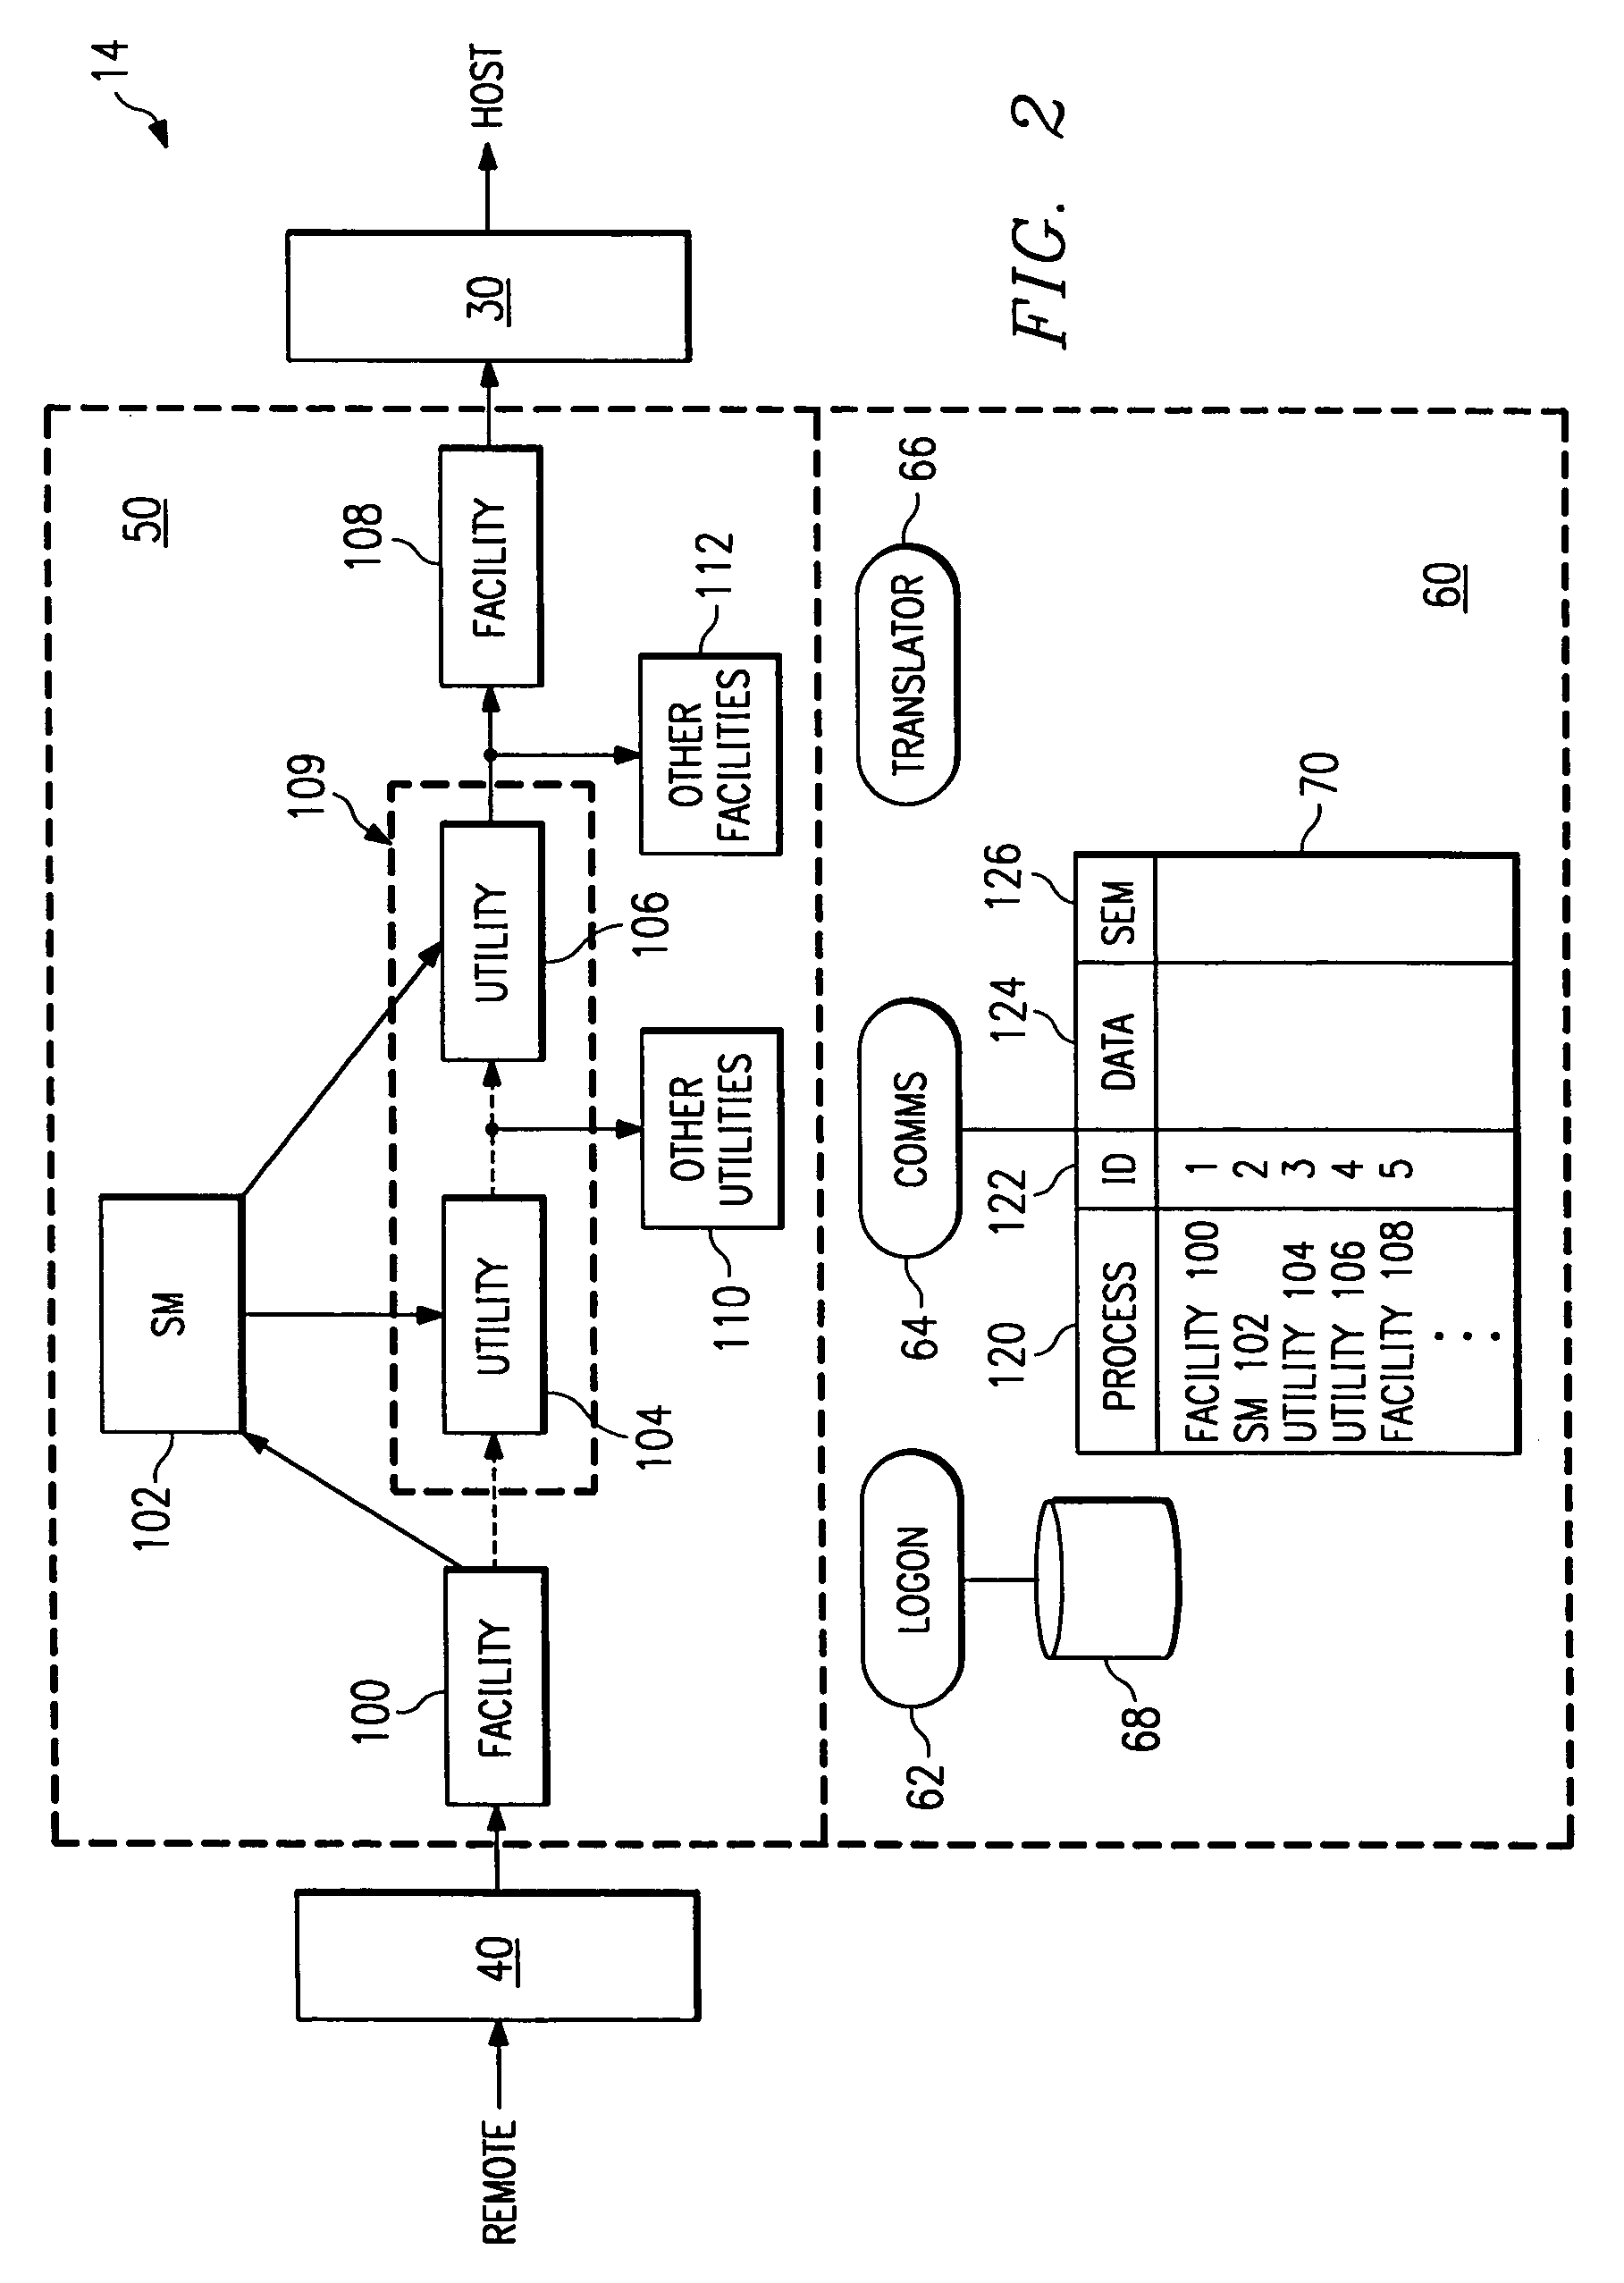 Protocol conversion using facilities and utilities